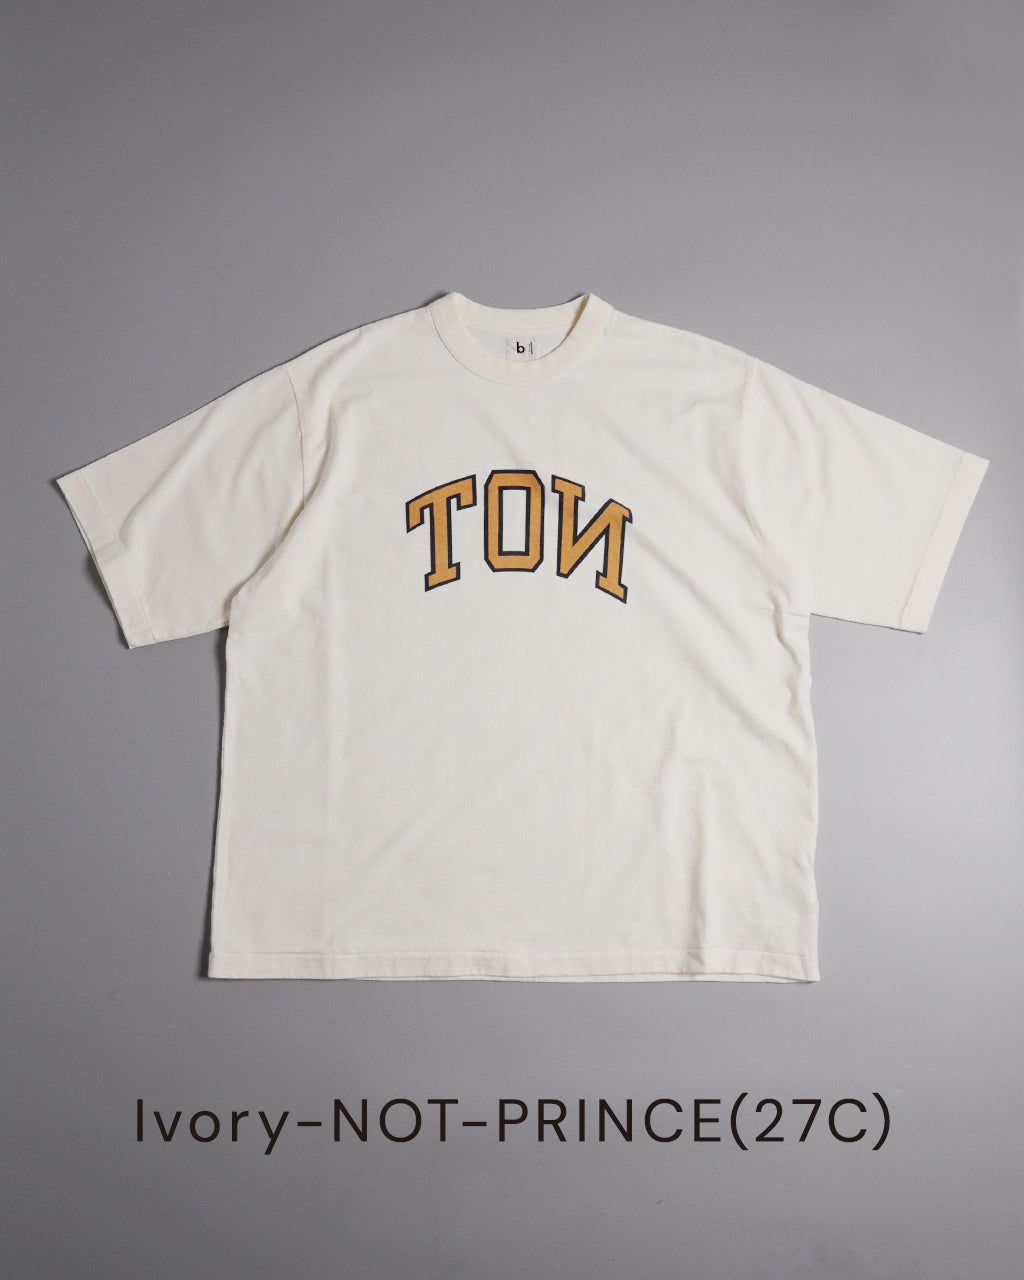 blurhms ROOTSTOCK ブラームス ルーツストック プリント Tシャツ ワイド NOT-PRINCE 88/12 Print Tee WIDE【送料無料】正規取扱店